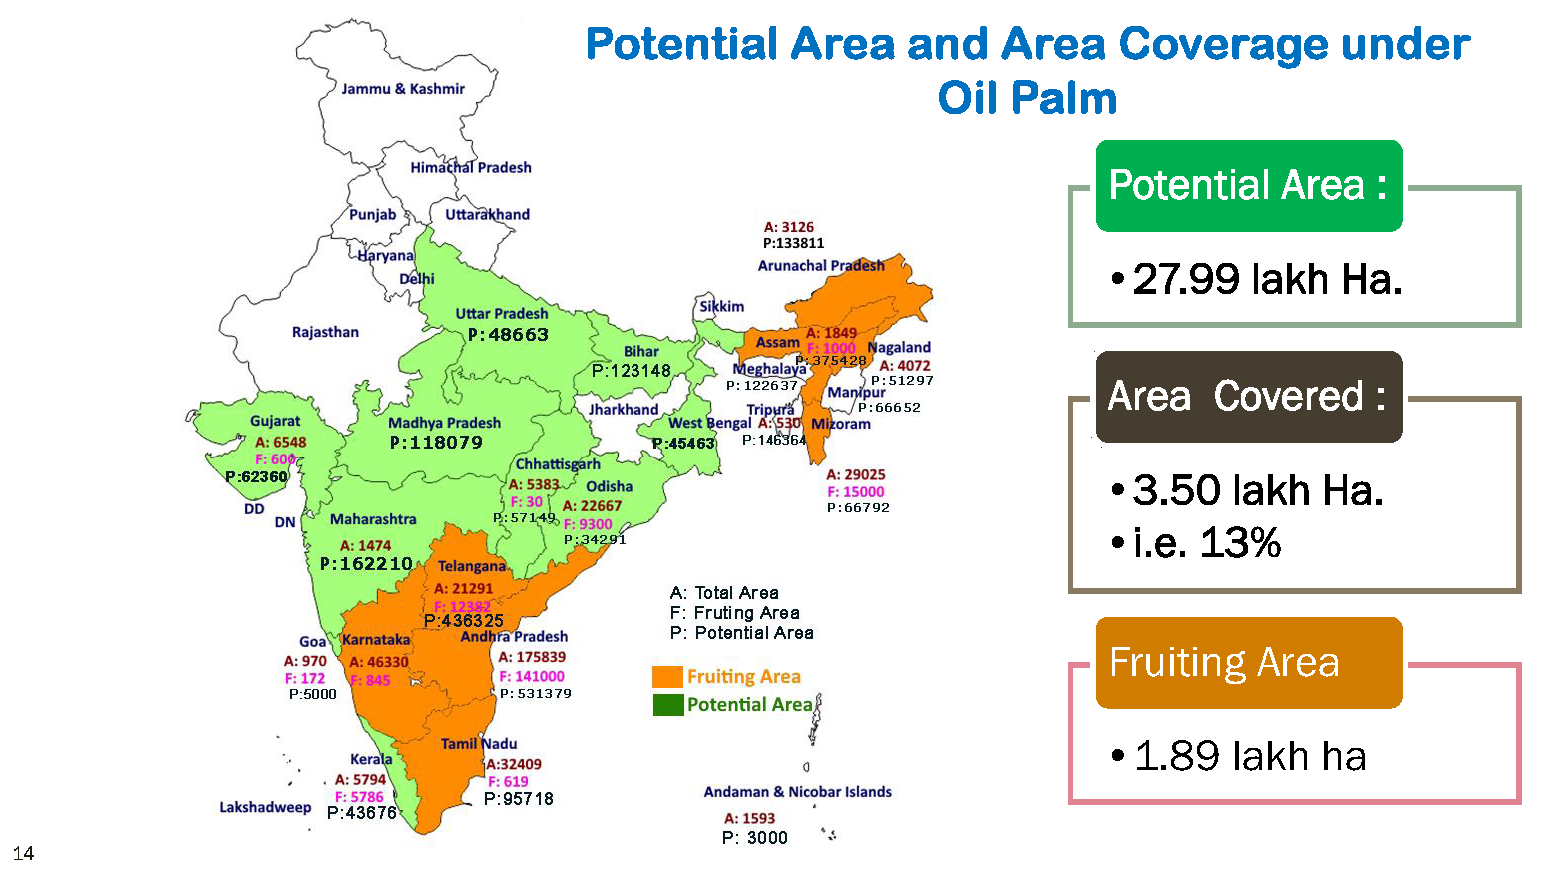 Map of Potential Area and Area Coverage under Oil Palm in India